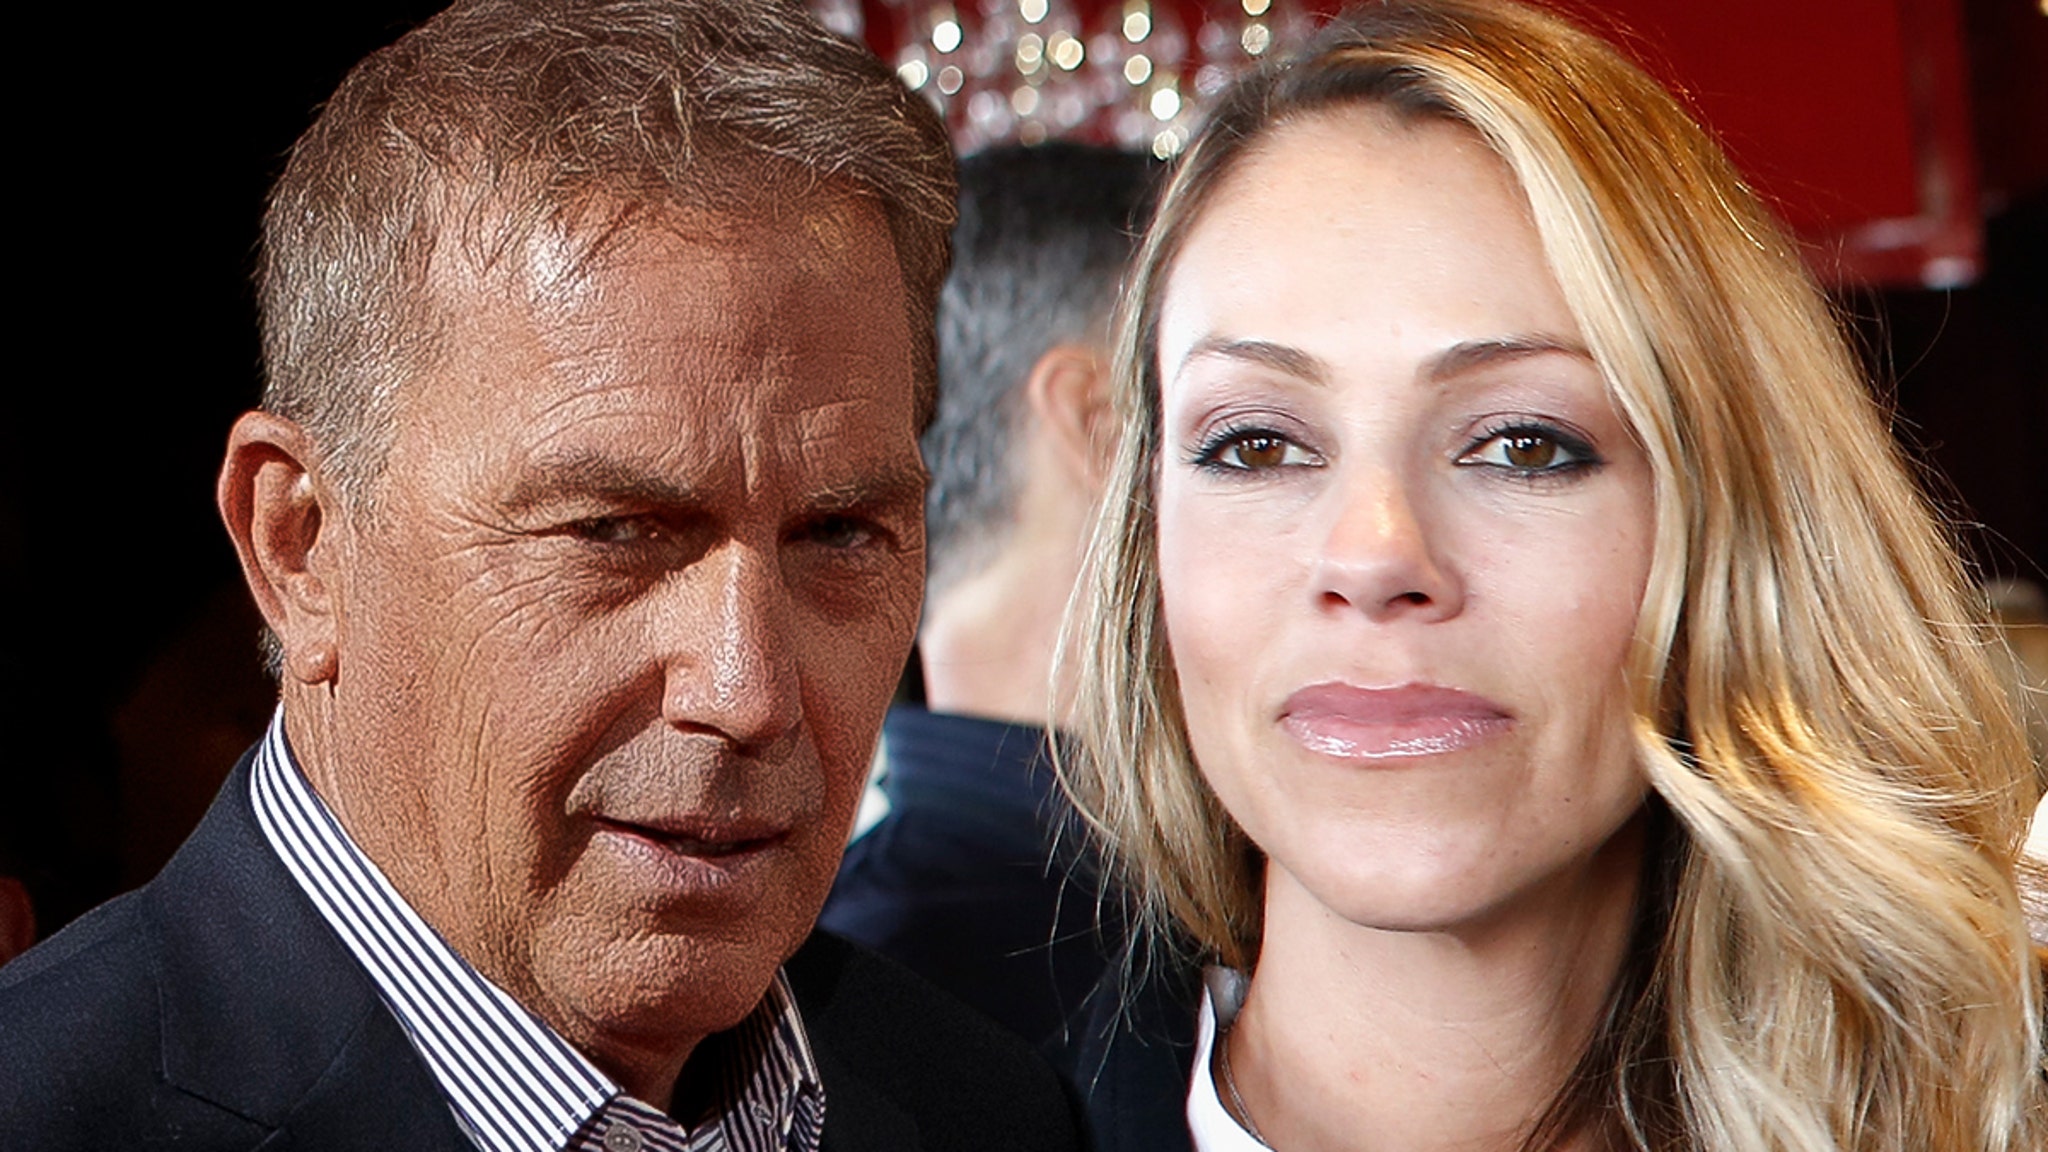 Kevin Costner Scoffs at Wife Christine's Request for 5,000 in Attorney's Fees